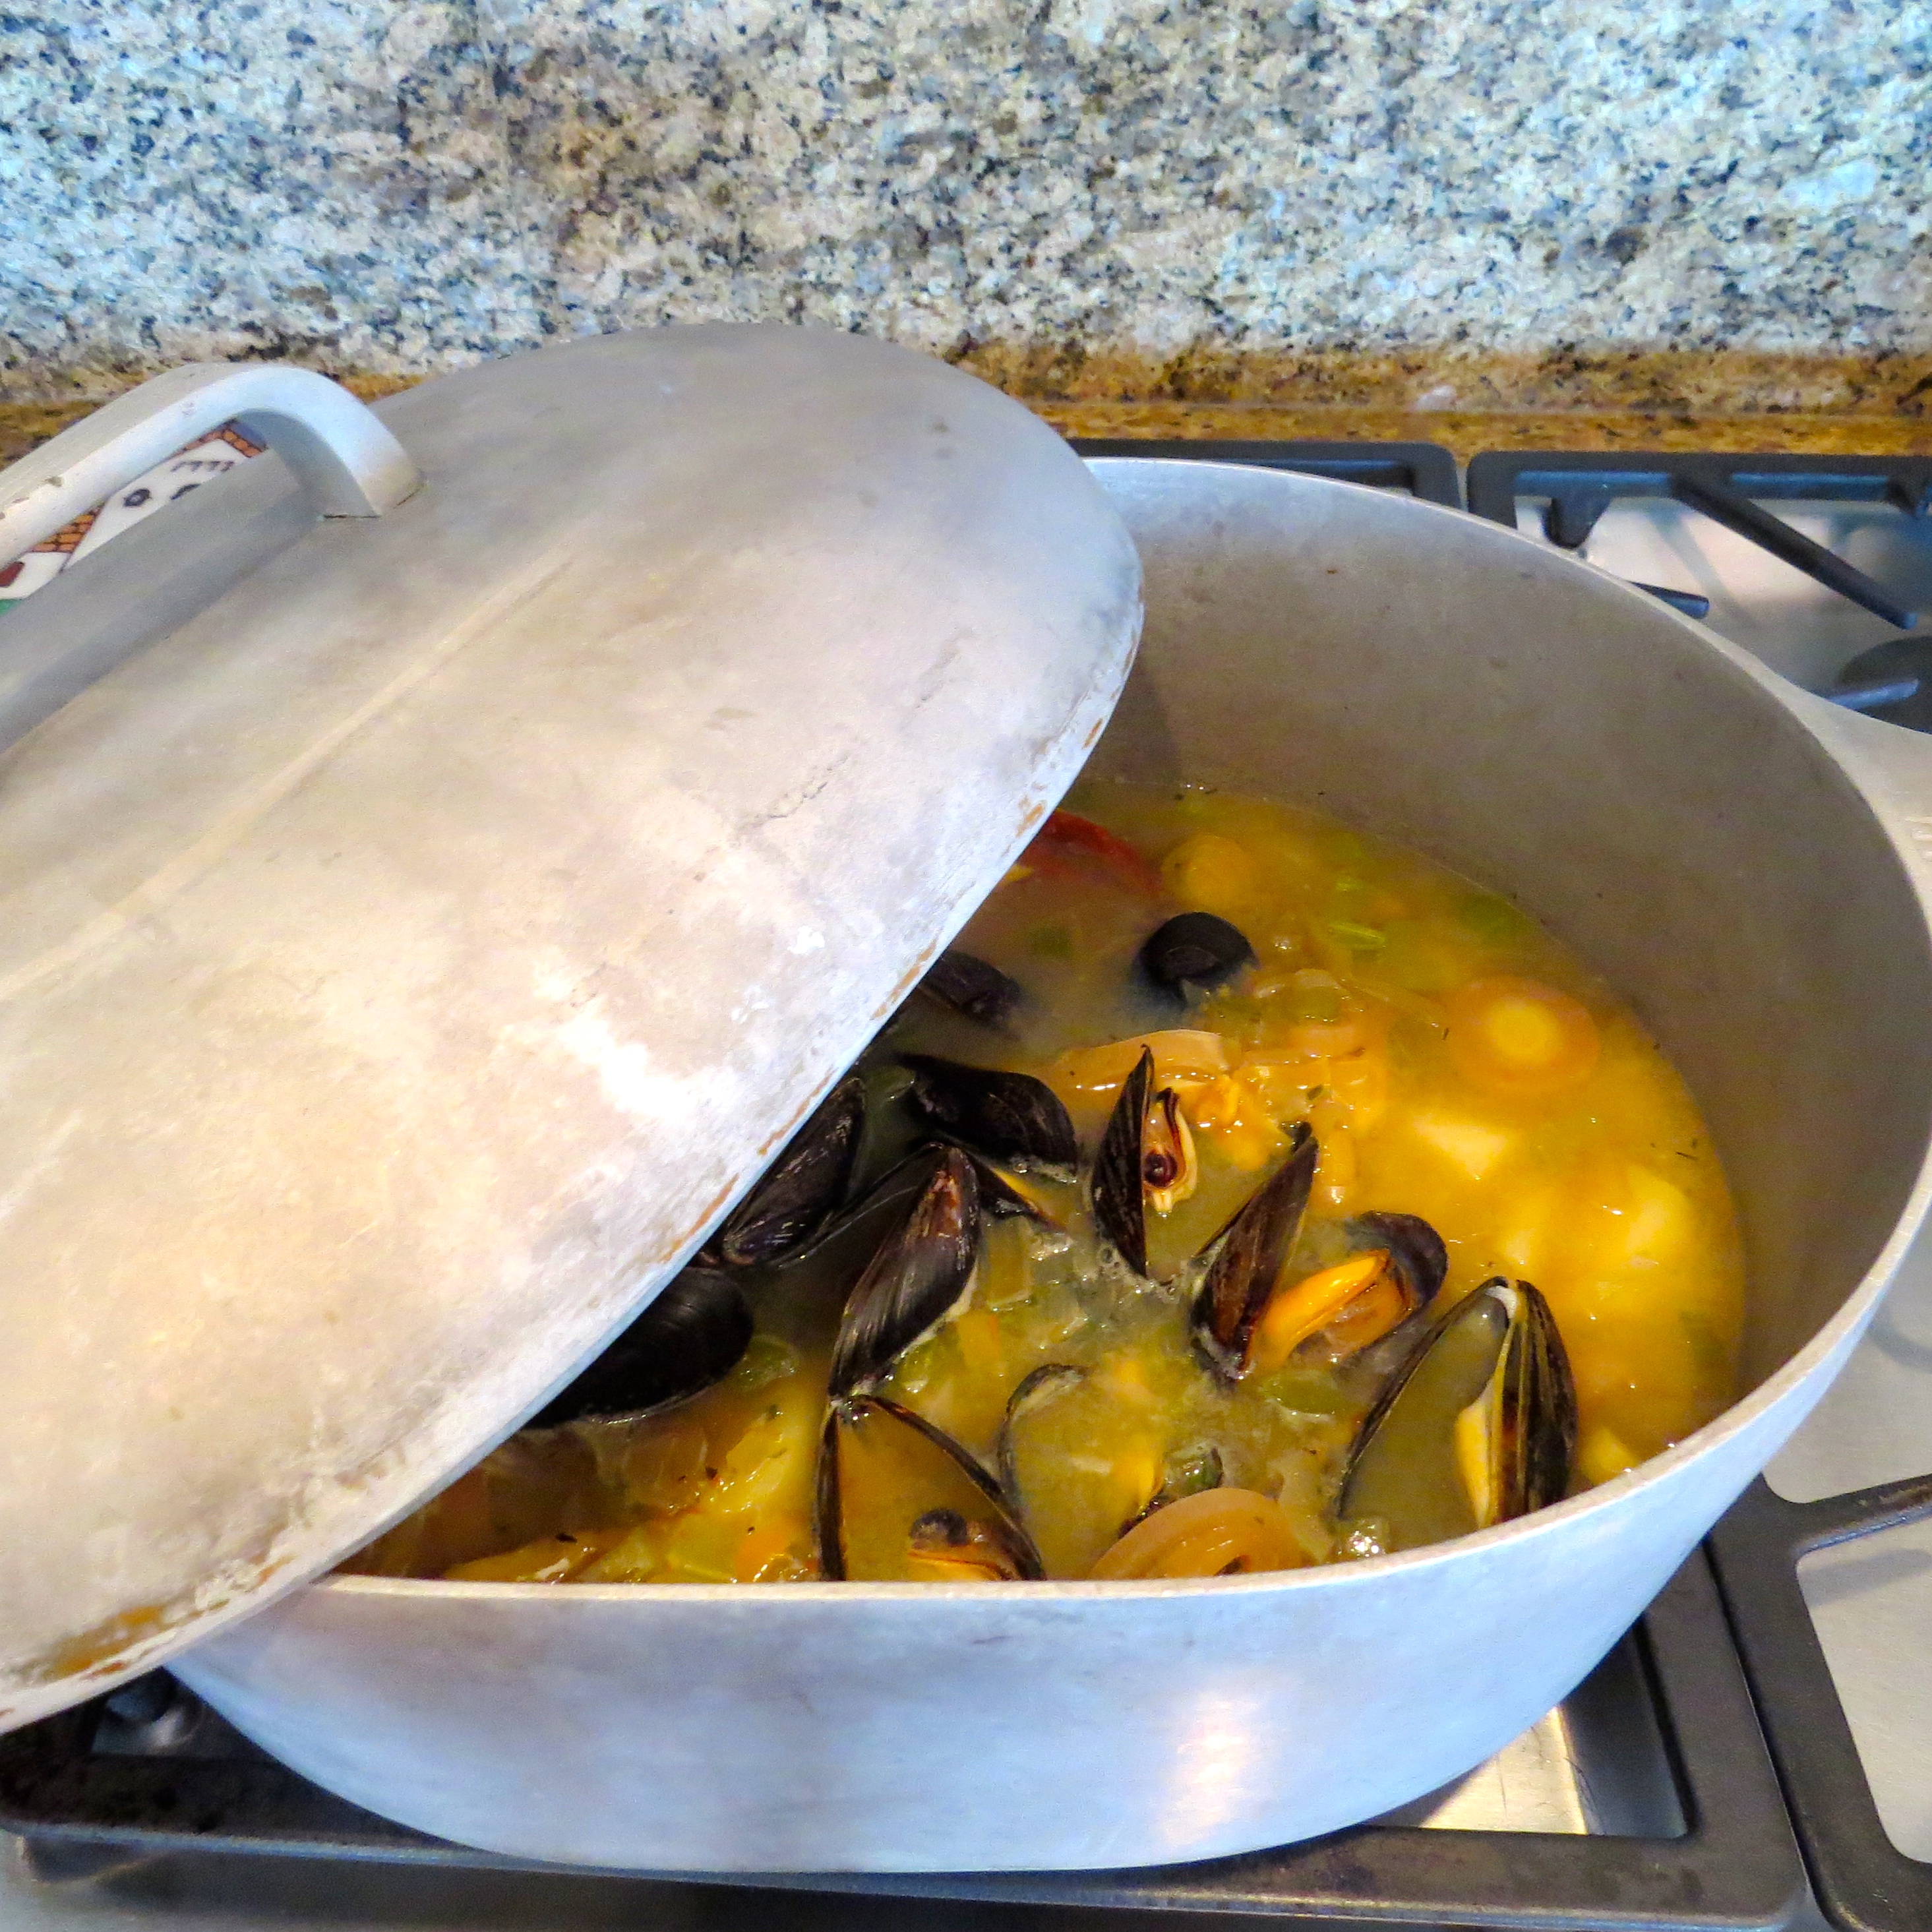 It is traditional with this dish, which Dorie calls Simplest Breton Fish Soup, to bring the kettle to the table and ladle the soup into bowls which have a toasted baguette slice already at the bottom.  